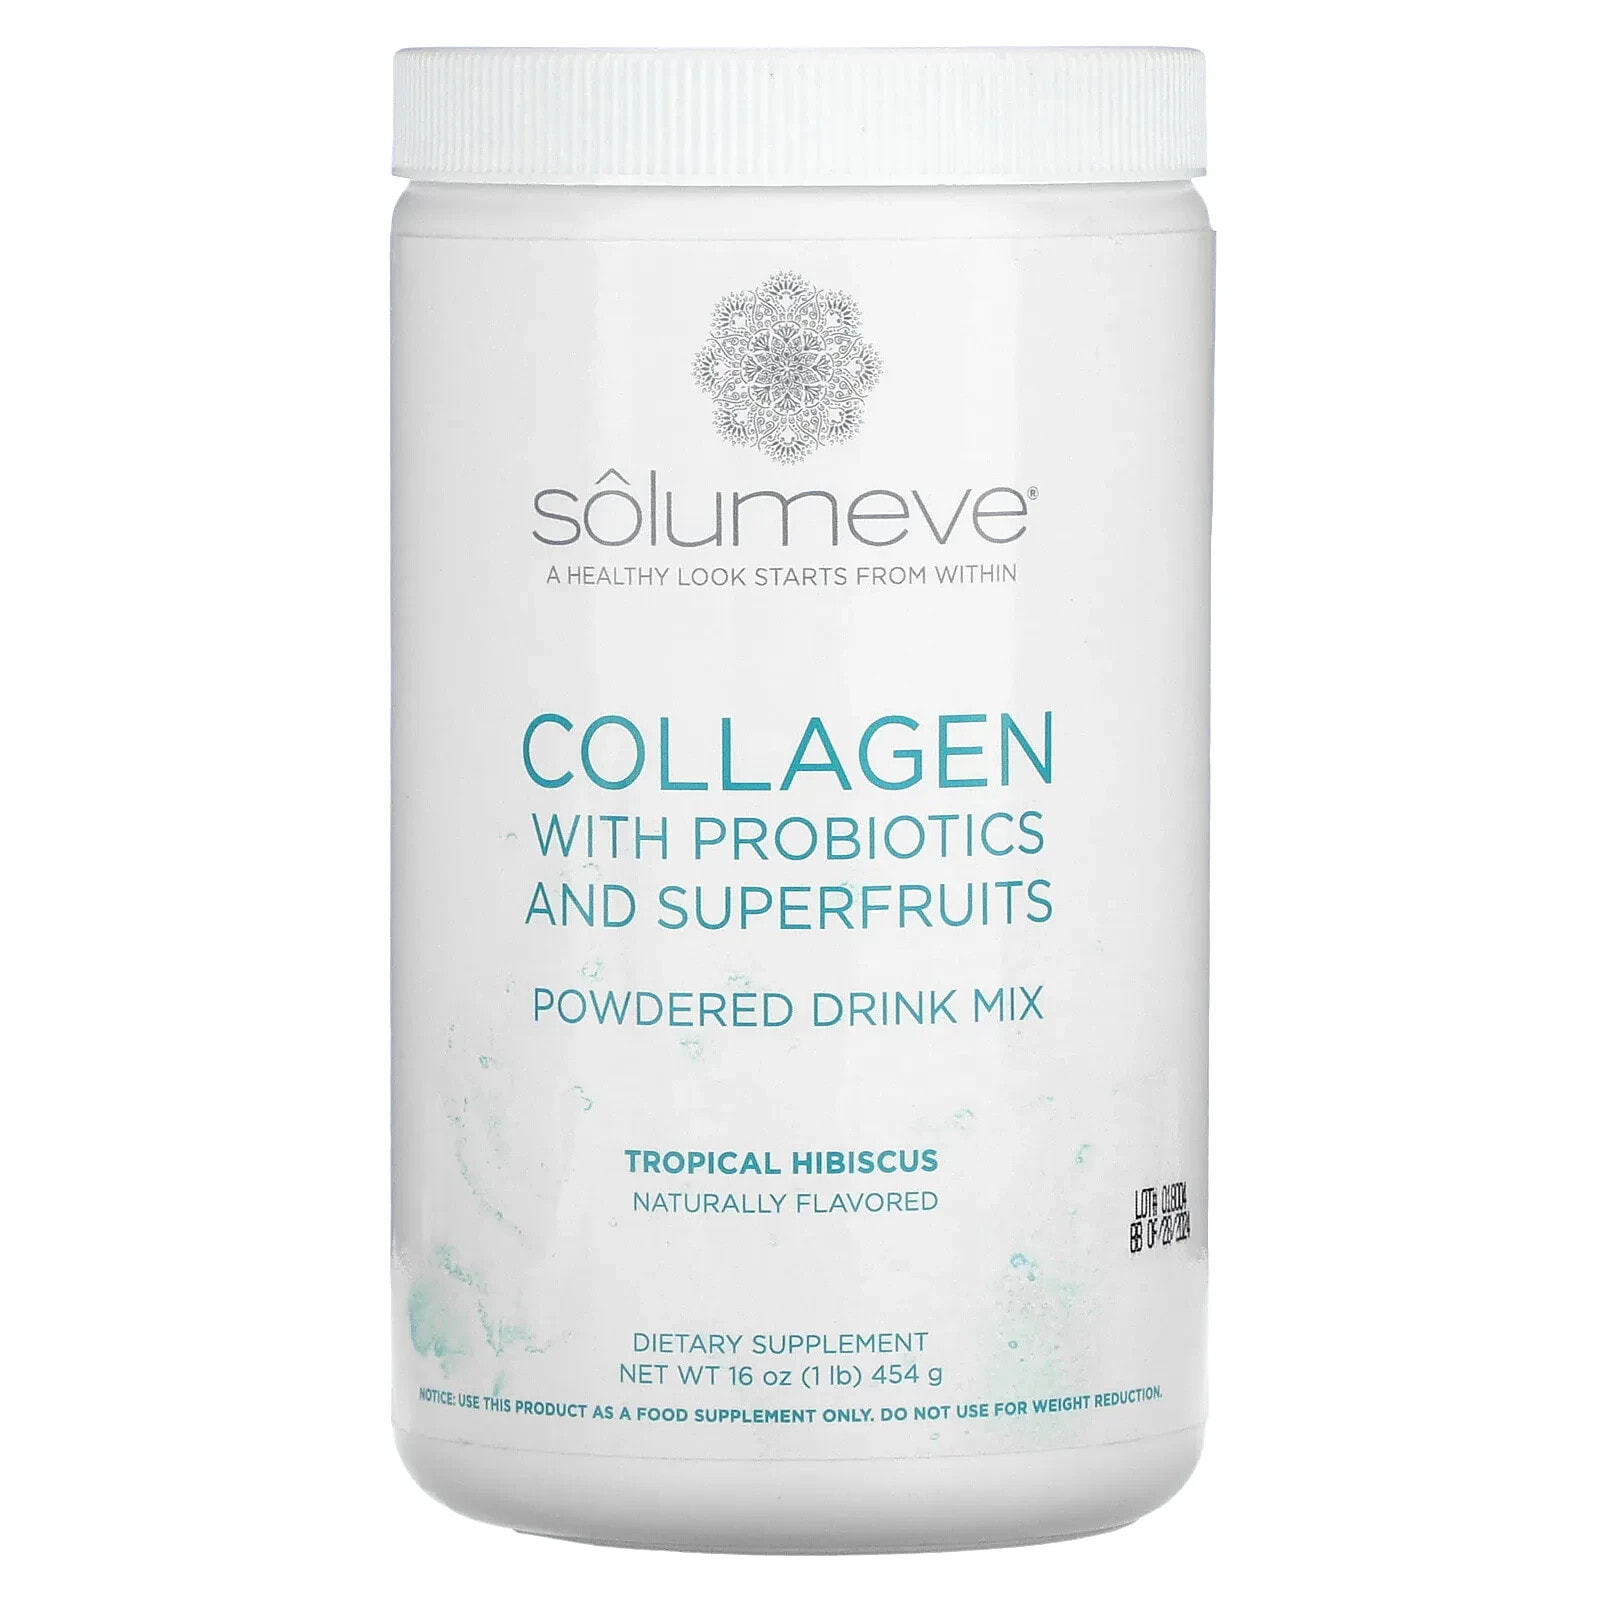 Collagen with Probiotics and Superfruits, Powdered Drink Mix, Tropical Hibiscus, 16 oz (454 g)